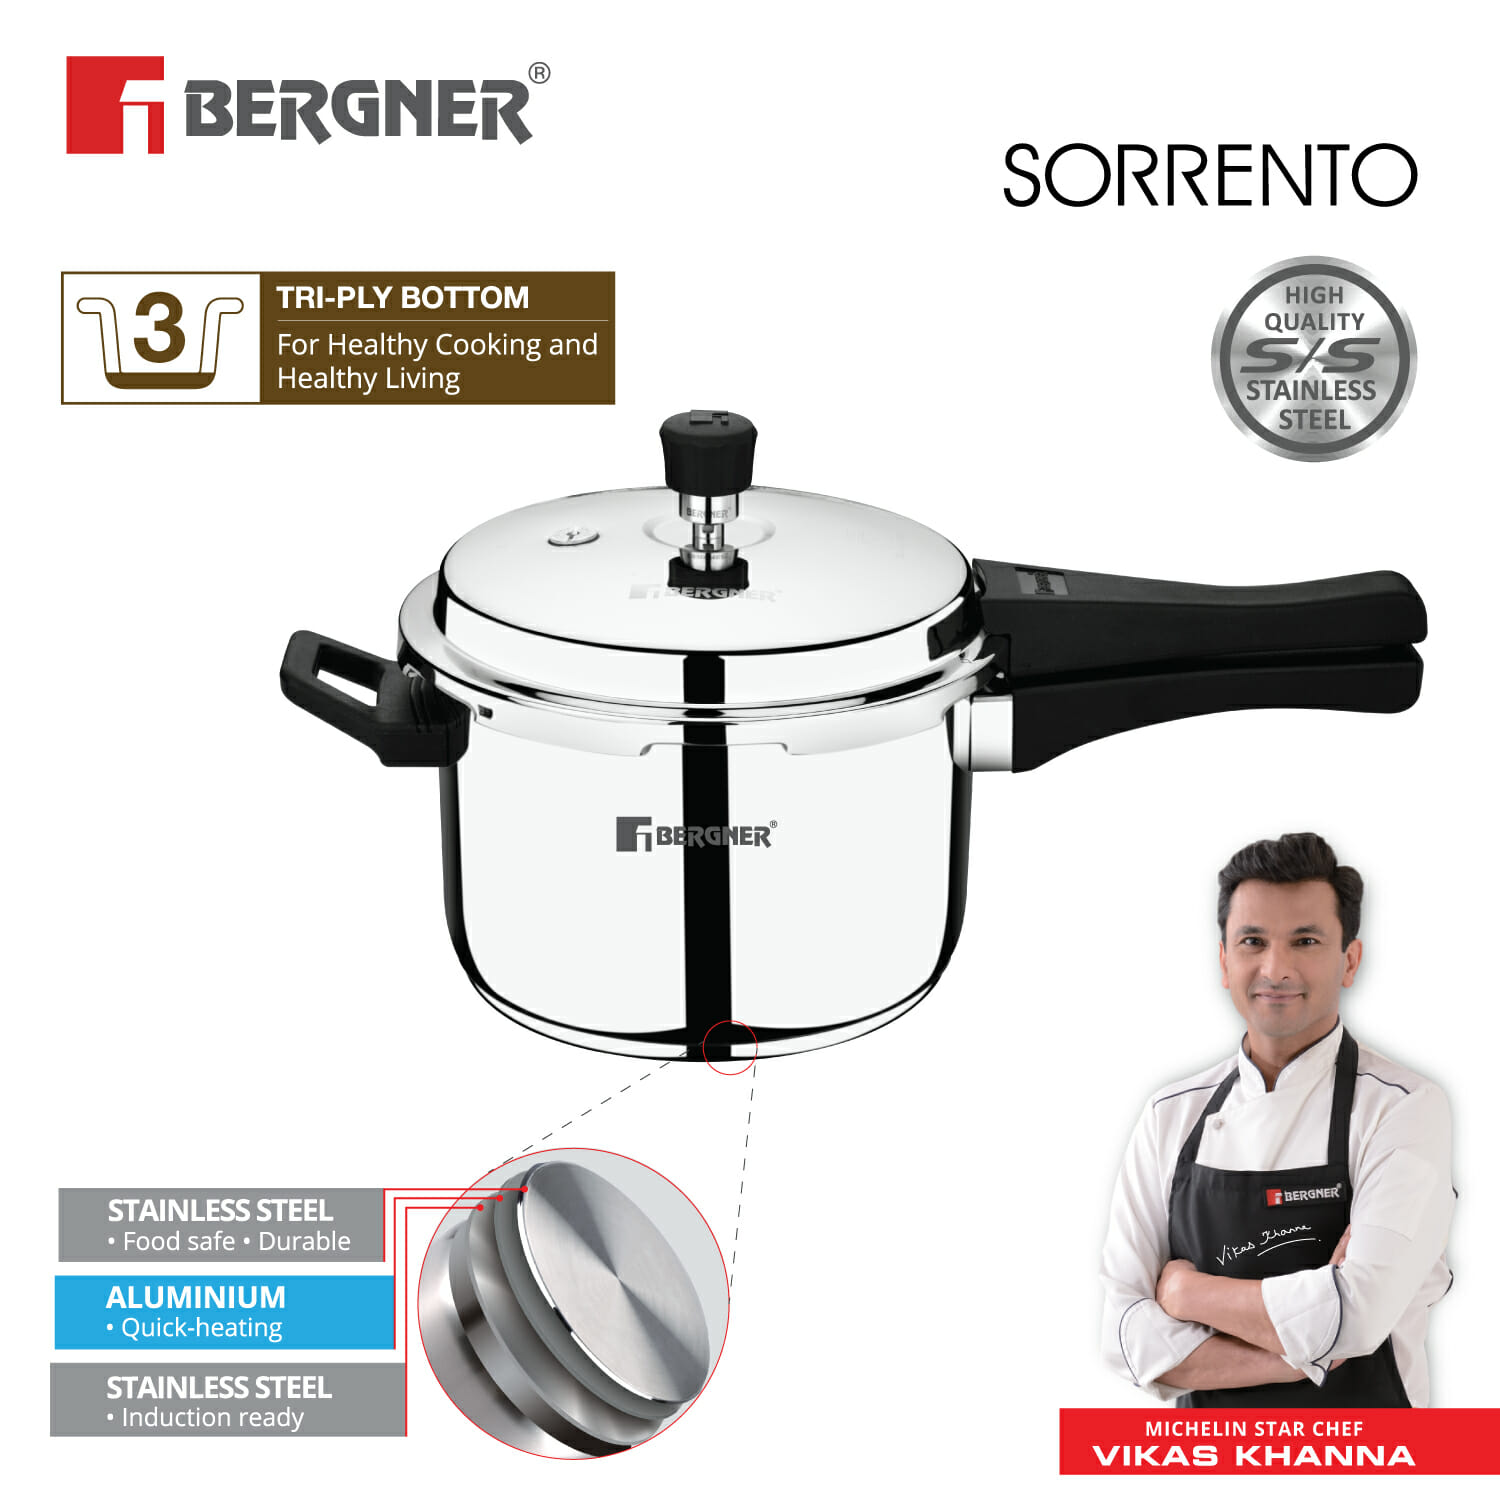 5 Liters Stovetop Pressure Cooker YT52 - ShopiPersia